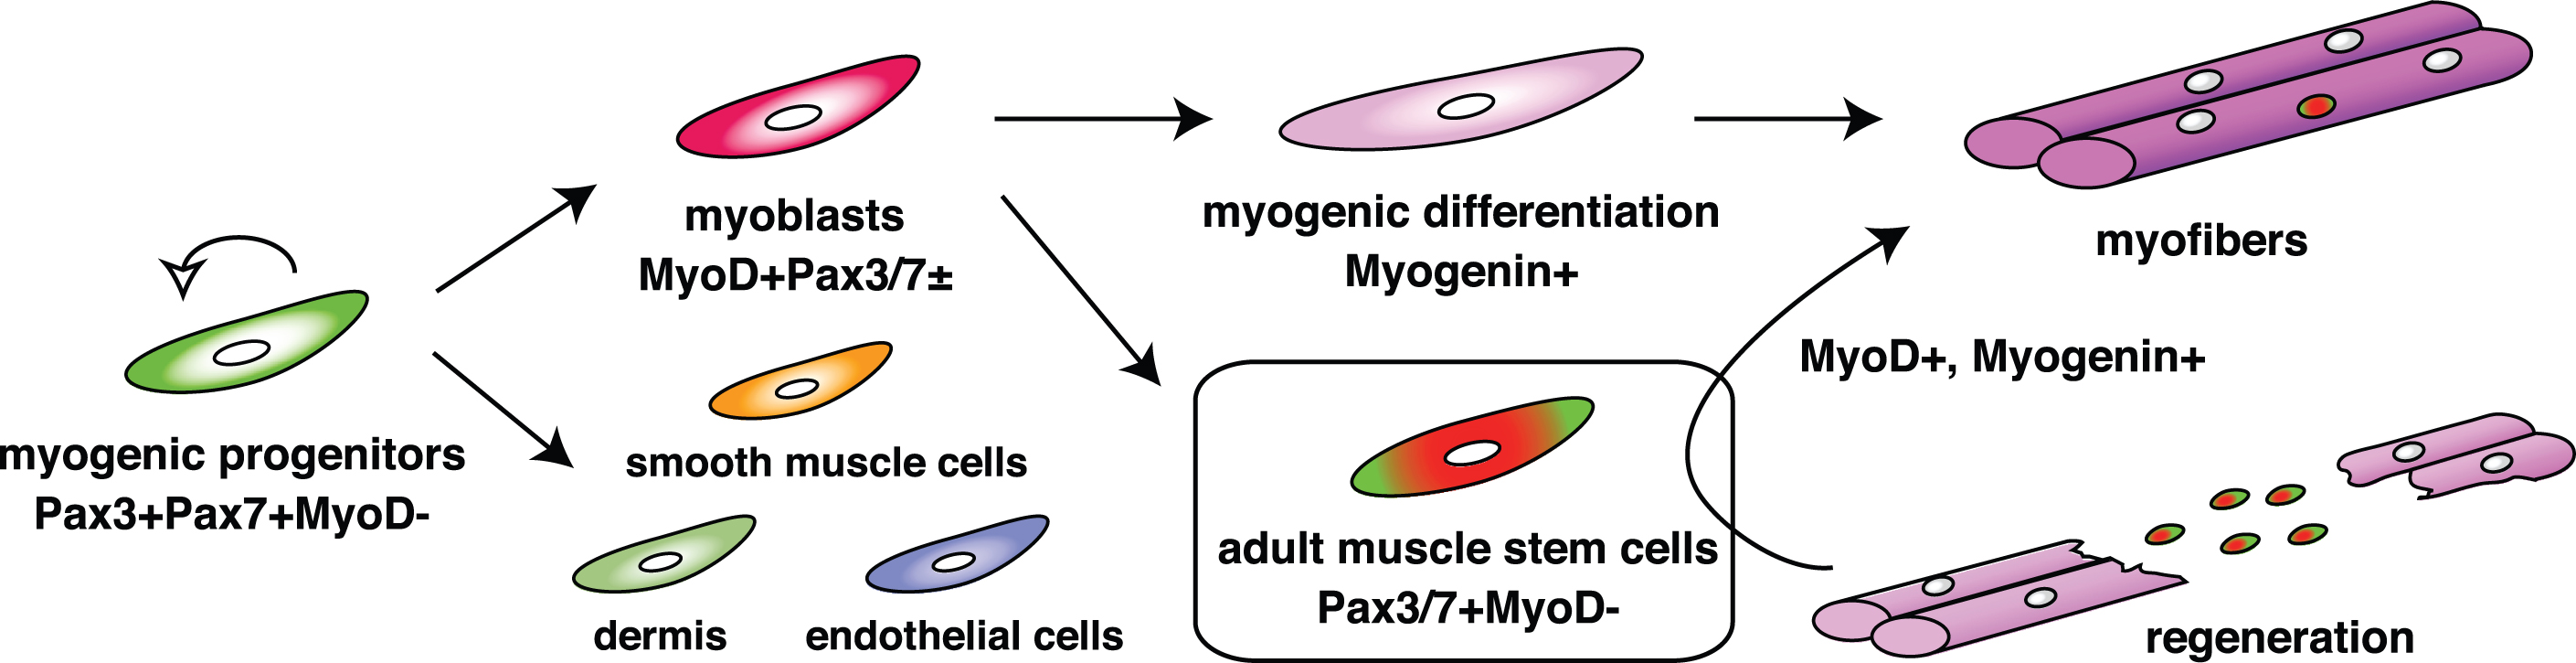 The expression cascade of pivotal transcription factors for myogenesis. As shown in Fig. 1, segmented somites are formed. Pax3 and Pax7 are activated in the dermomyotome (Pax3 + Pax7 + MyoD-). They work as master regulators for the induction of myogenic progenitors. Myogenic regulatory factors are next upregulated in both lips of the dermomyotome and function as master regulators for myogenic specification to generate myoblasts (MyoD + Pax3/7±). Eventually, myoblasts stop cell proliferation and express Myogenin (myogenic differentiation), which induces terminal differentiation of myoblasts to form multinucleated myofibers. Adult muscle stem cells which are marked by the presence of Pax7 or Pax7 and Pax3, but not MyoD, are derived from the MyoD/Myf5-primed myogenic lineage, contribute to muscle regeneration.